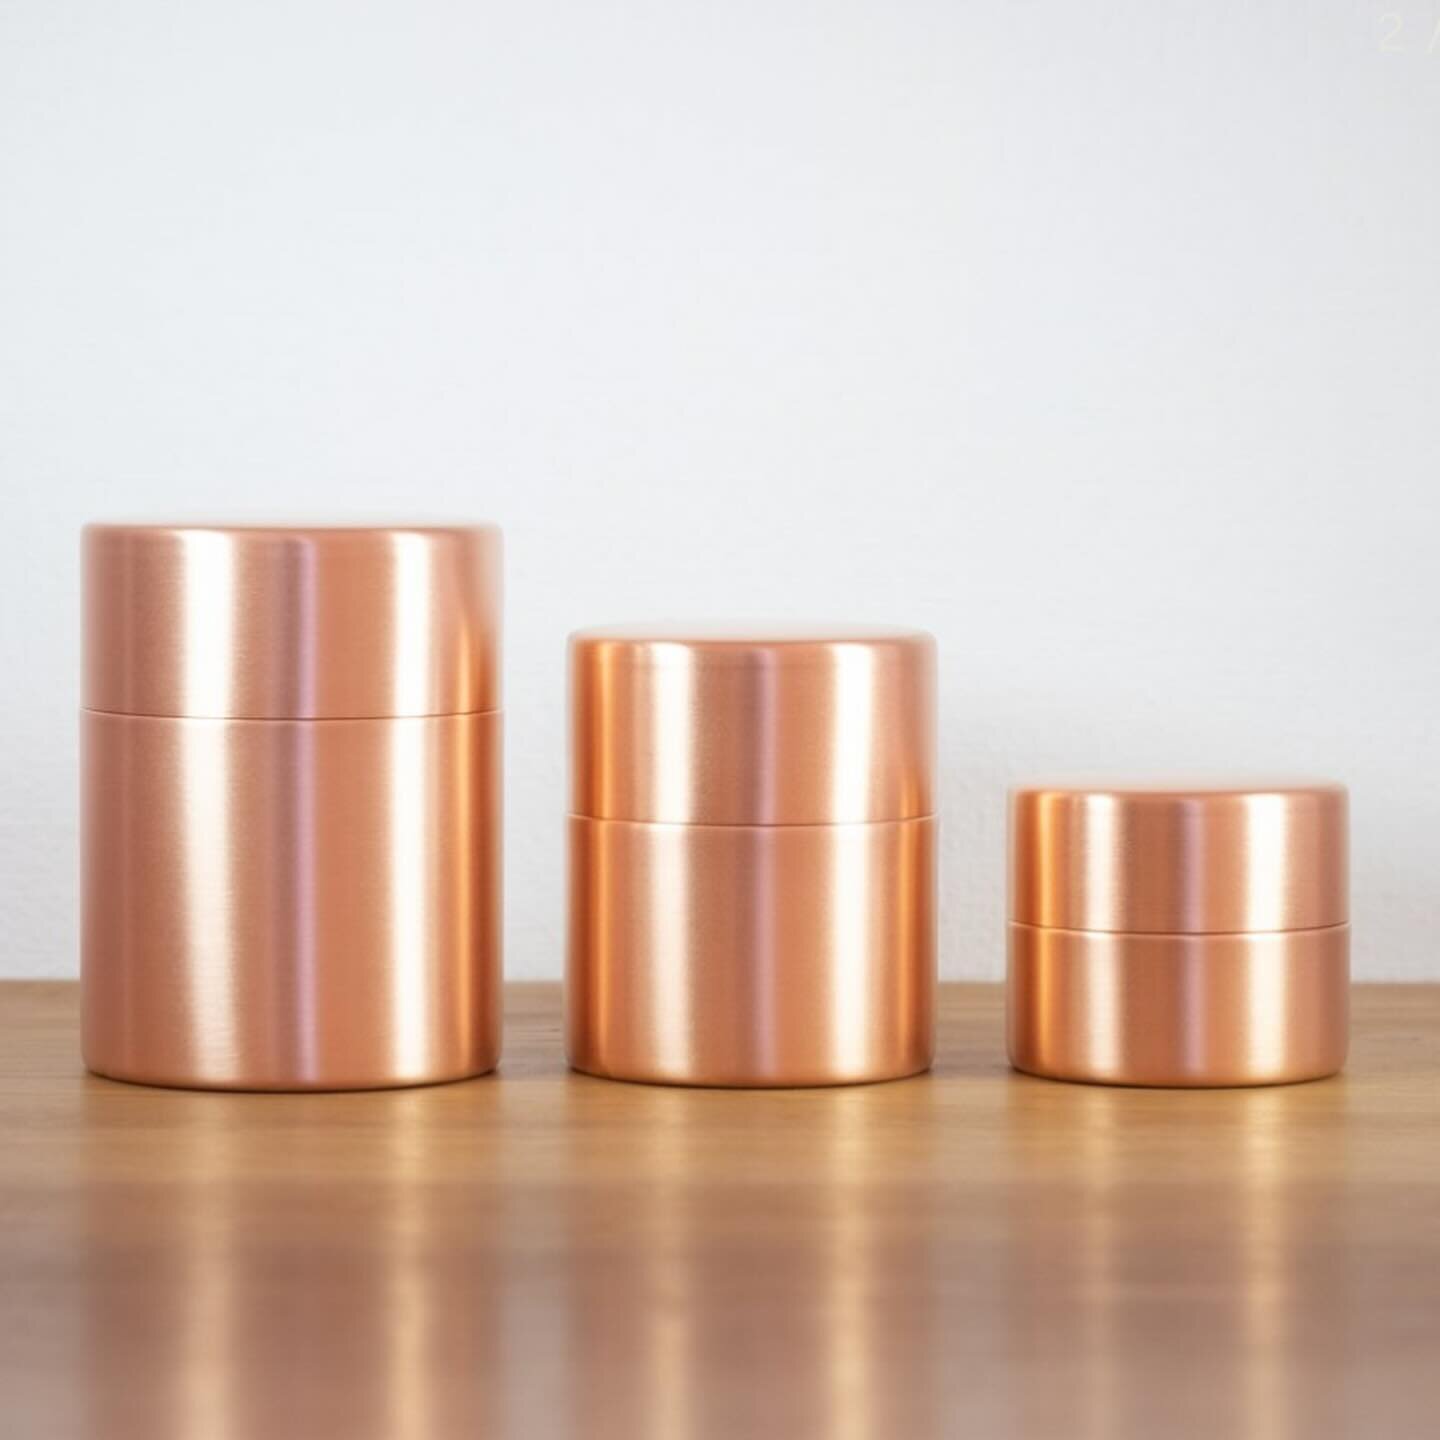 A copper tea caddy will add beauty to your daily tea ritual - today and everyday as the caddy will become even more beautiful with time as the copper patinates. 

The caddy&rsquo;s interior is lined with tin and features a fitted double lid that prot